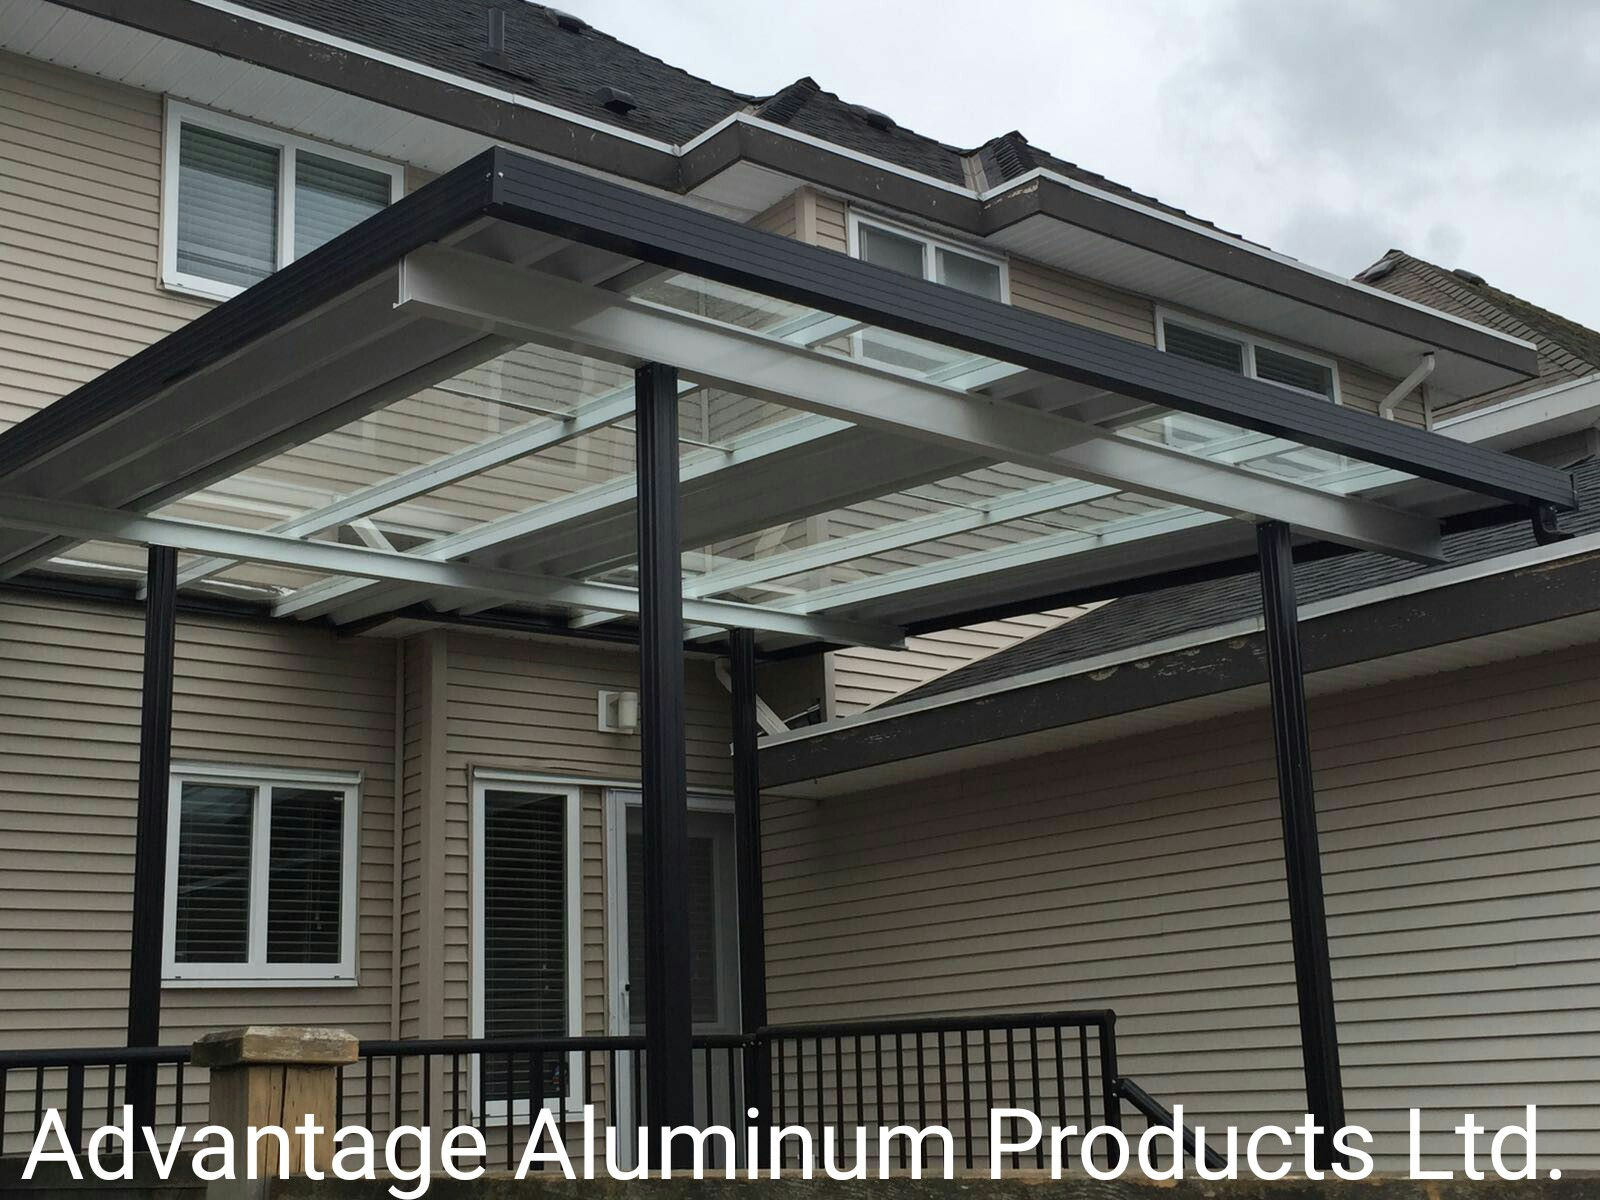 Best Quality Patio Cover Is At Advantage Aluminum Products throughout dimensions 1600 X 1200